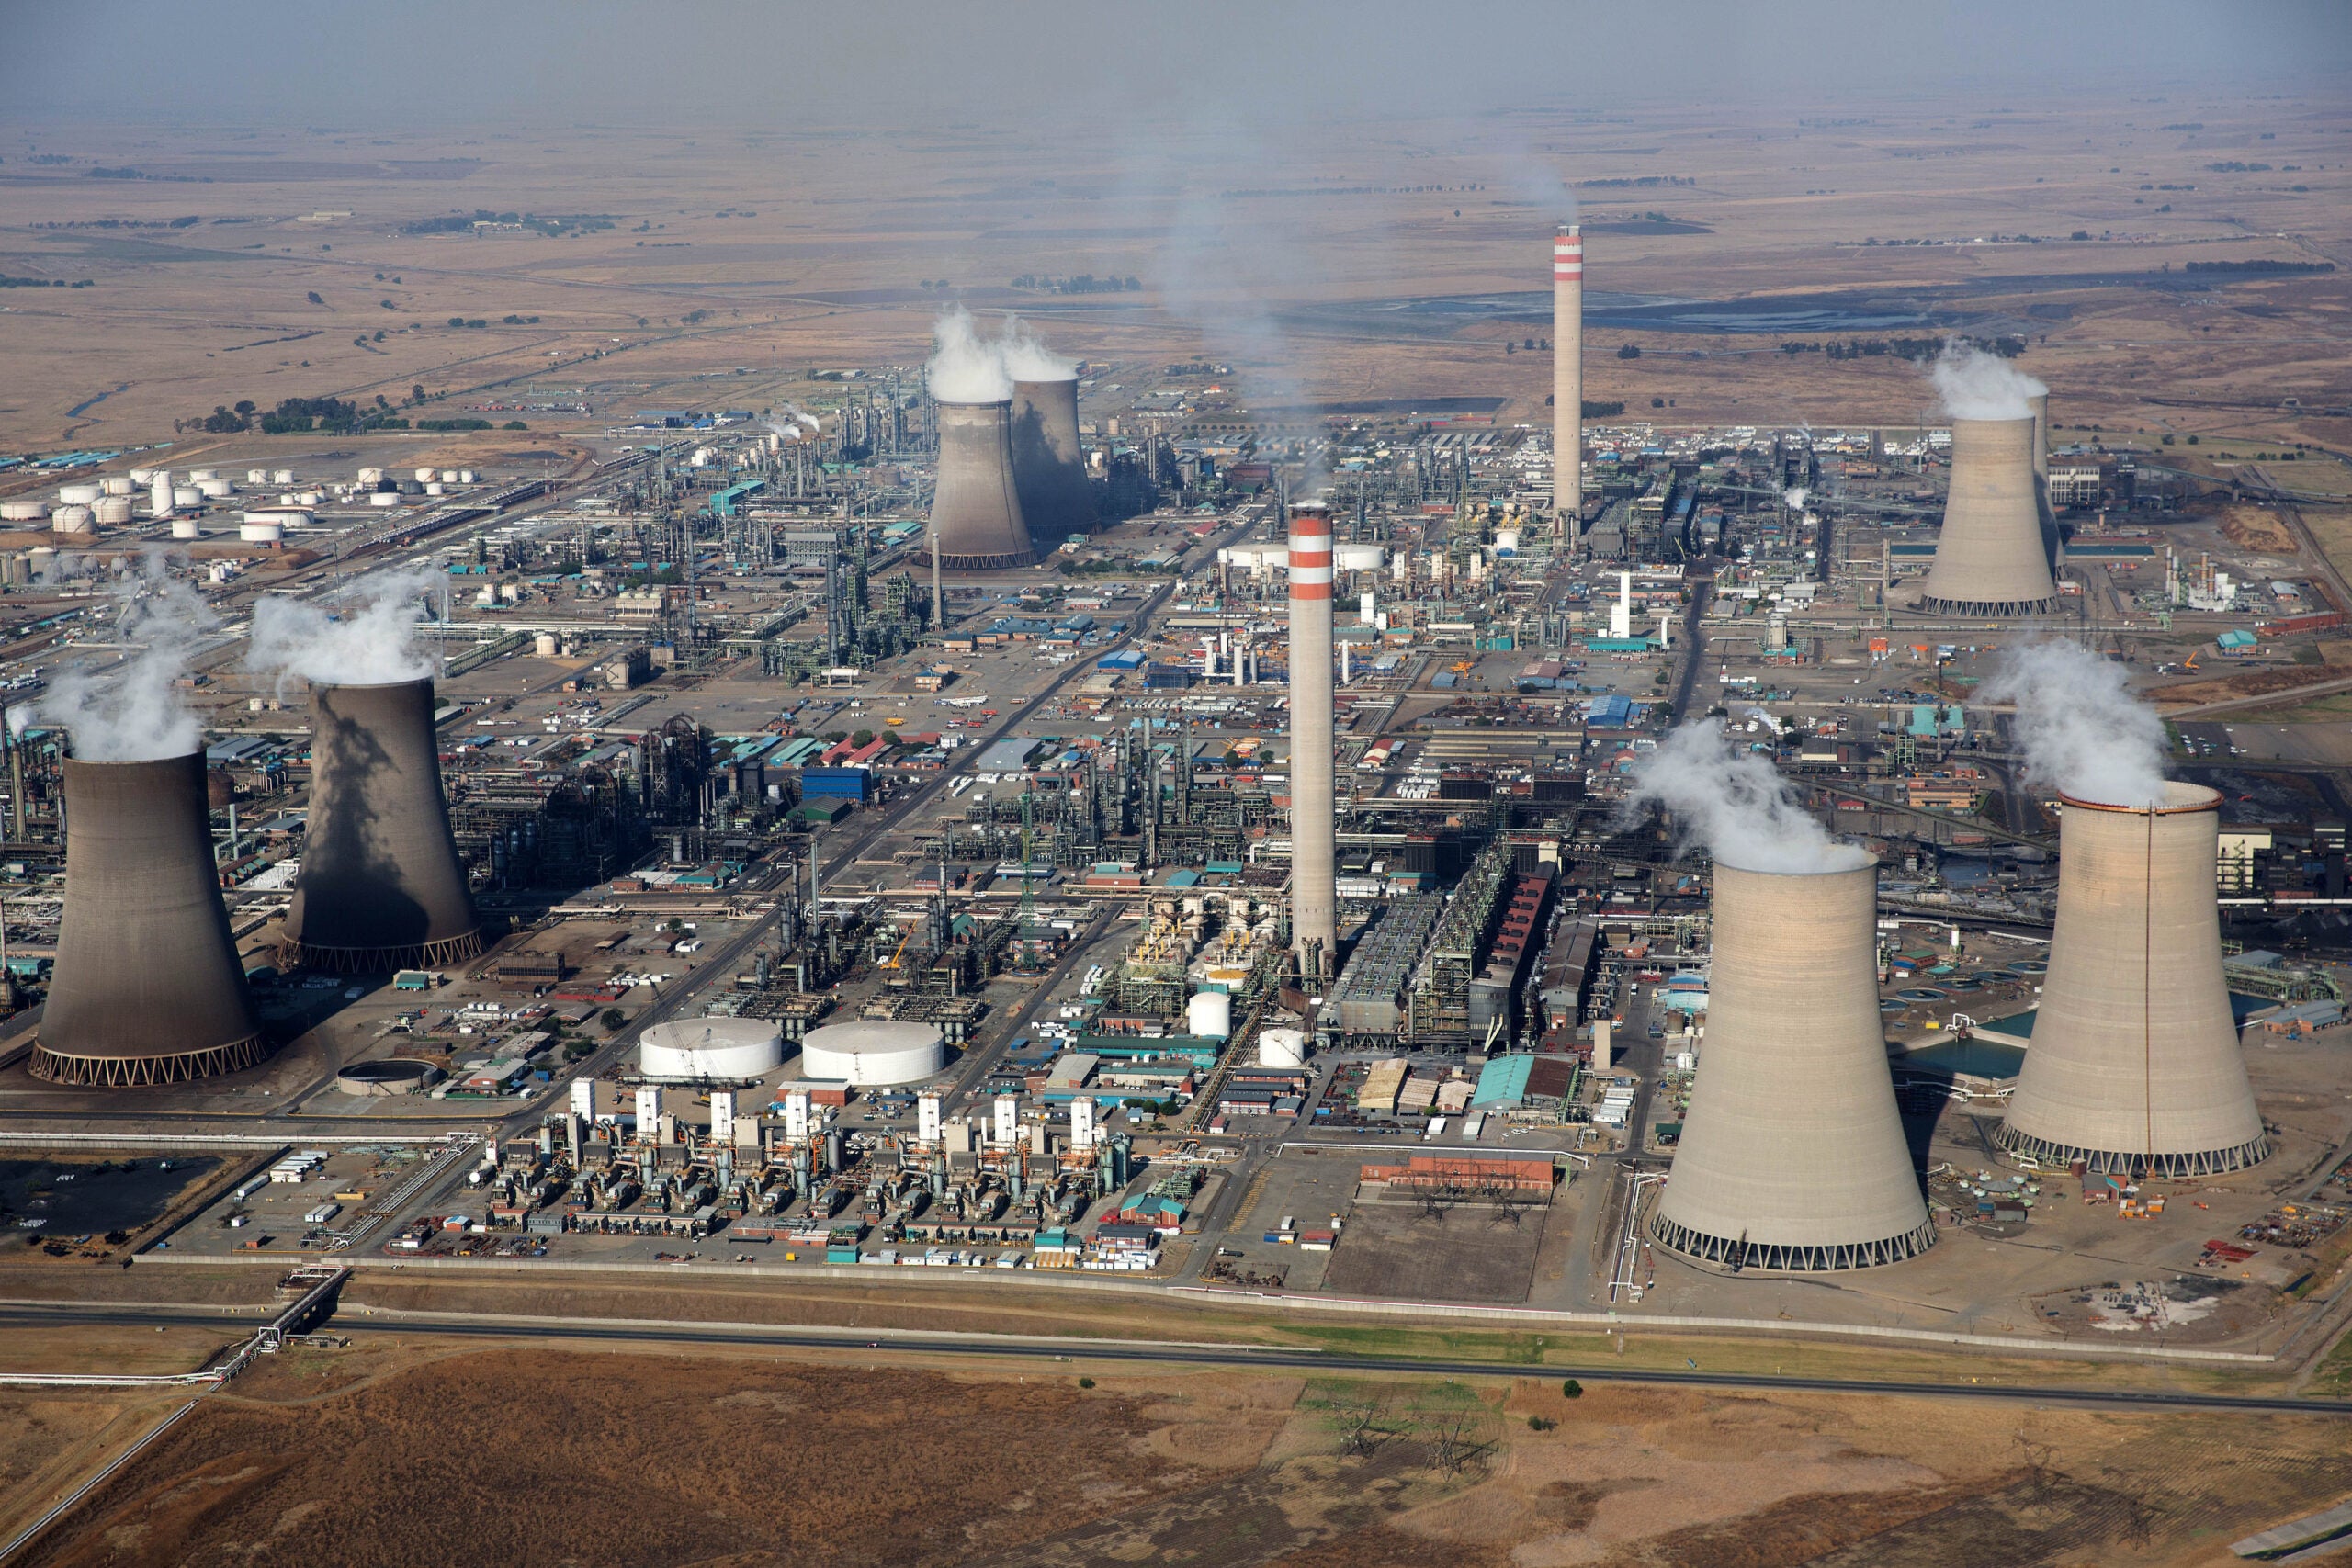 An aerial view of Secunda Power Station, one of the coal-fired plants that pollutes the air and water in South Africa's Mpumalanga province.